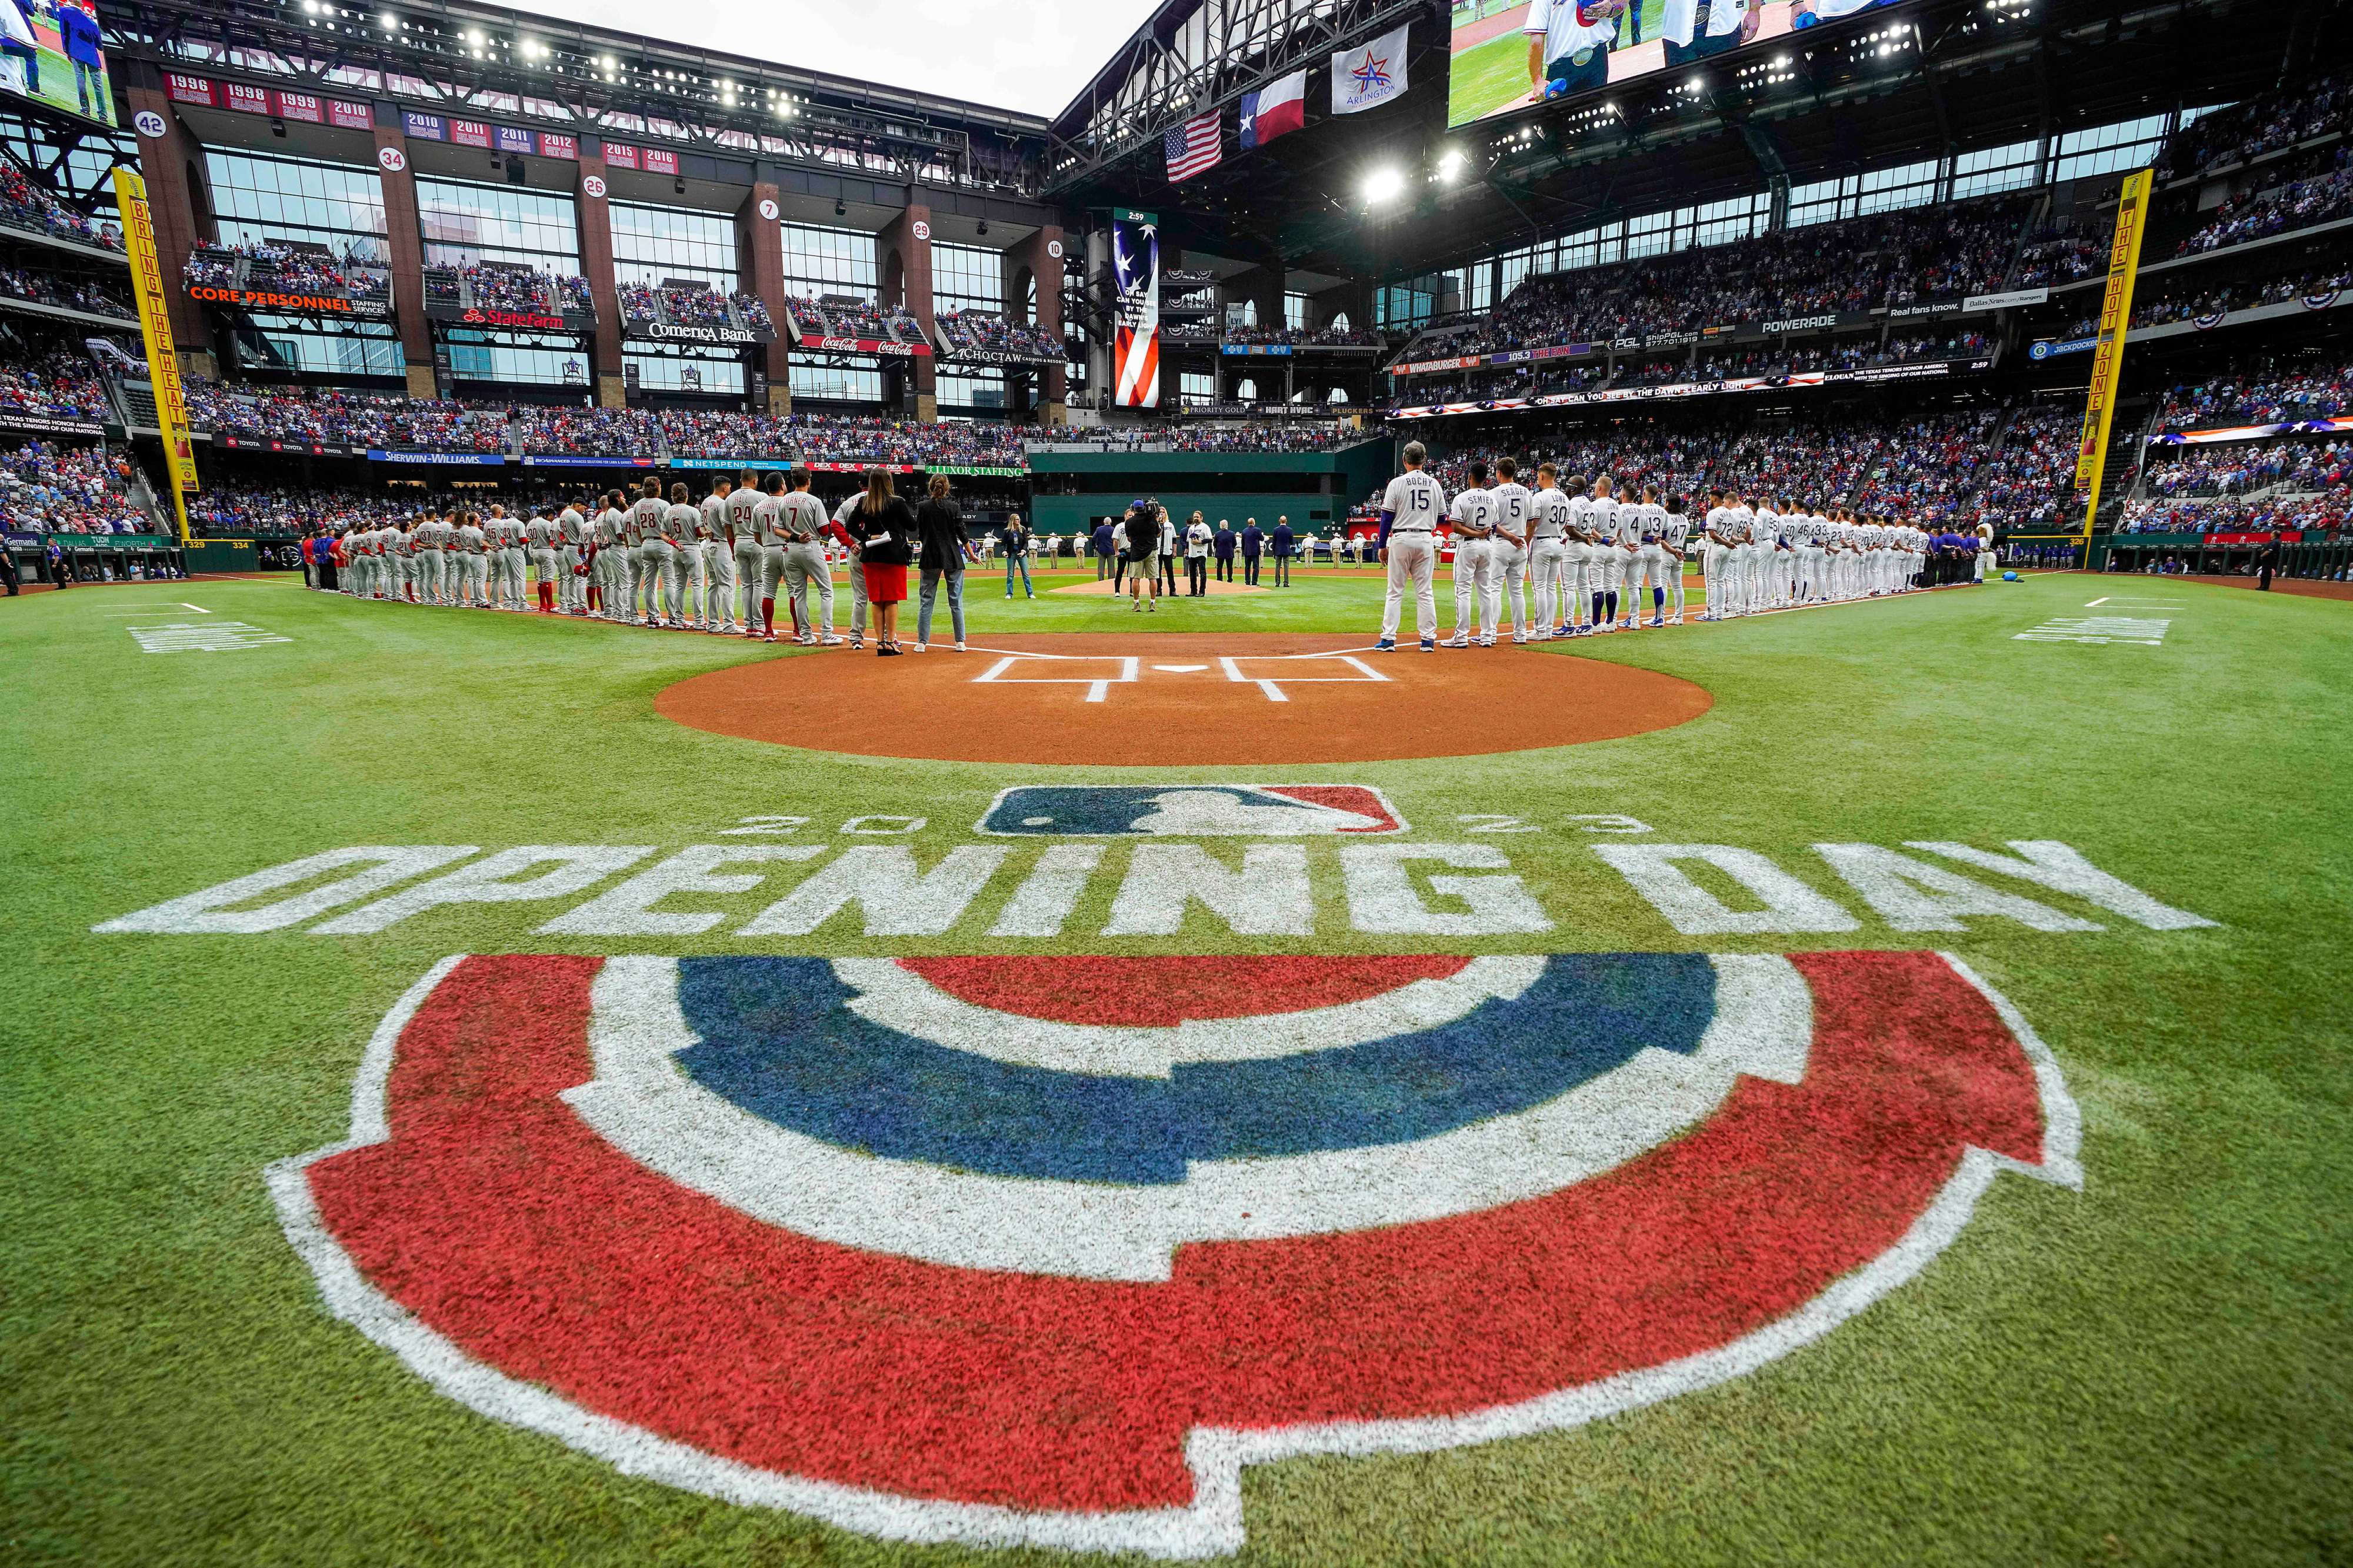 How to win a chance at Texas Rangers opening day tickets